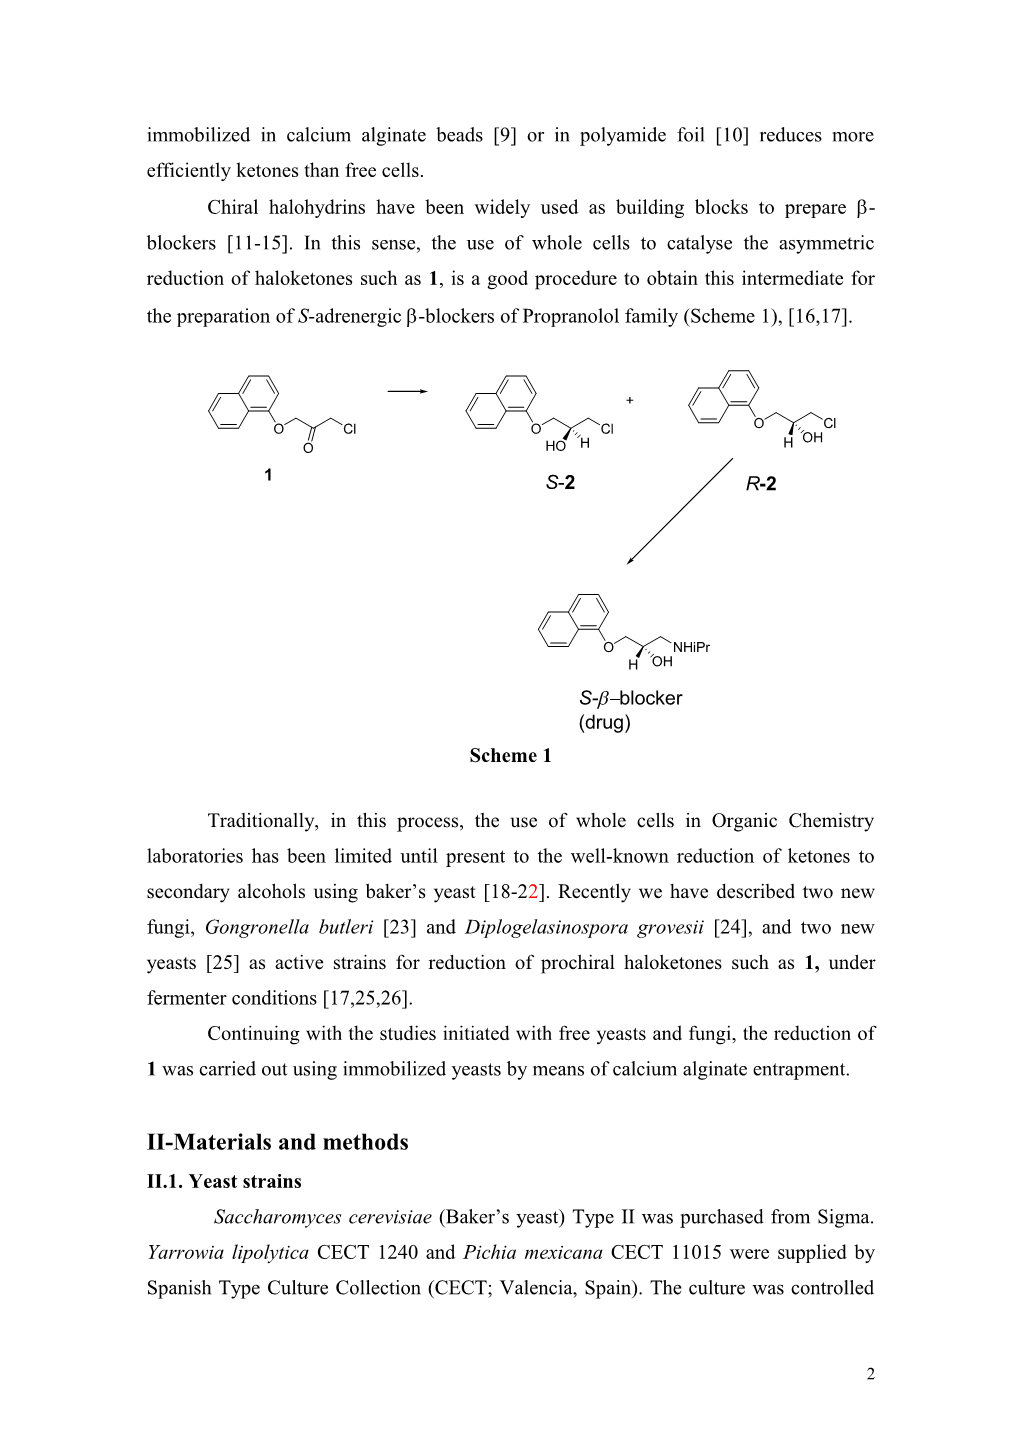 Immobilized Yeast Reduction for Enantioselective Production of Halohydrin Precursor Of